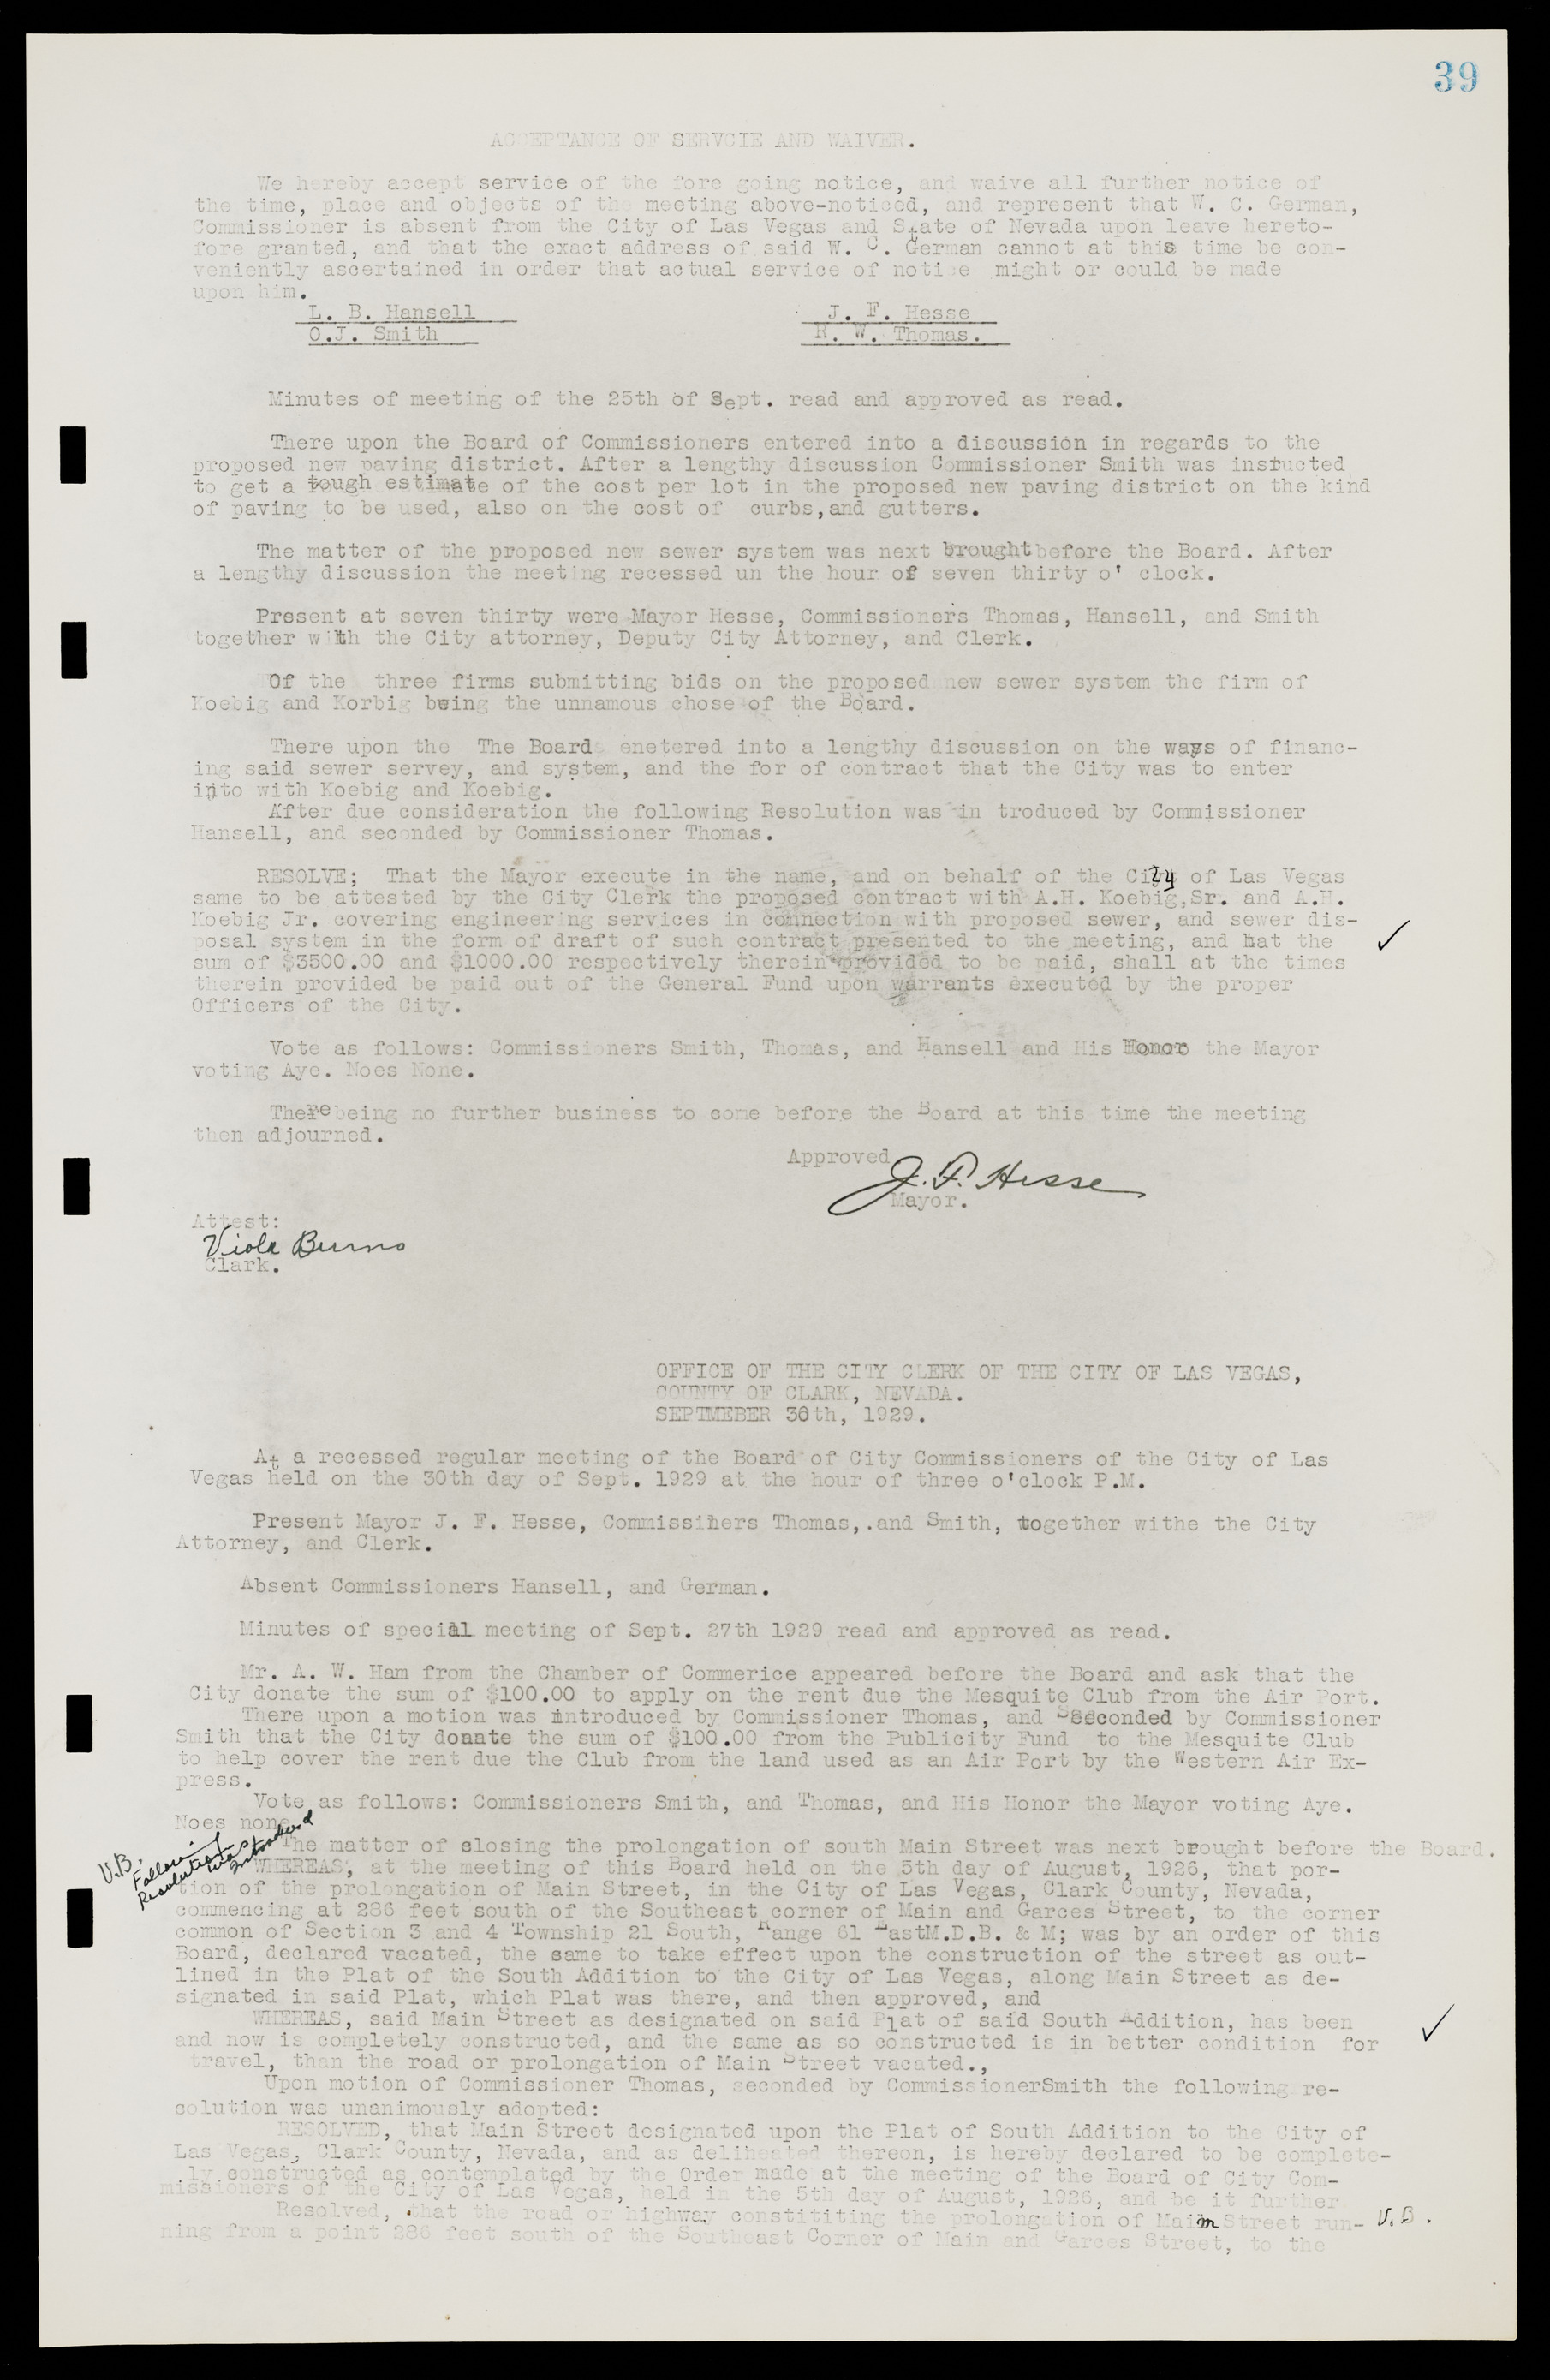 Las Vegas City Commission Minutes, May 14, 1929 to February 11, 1937, lvc000003-45